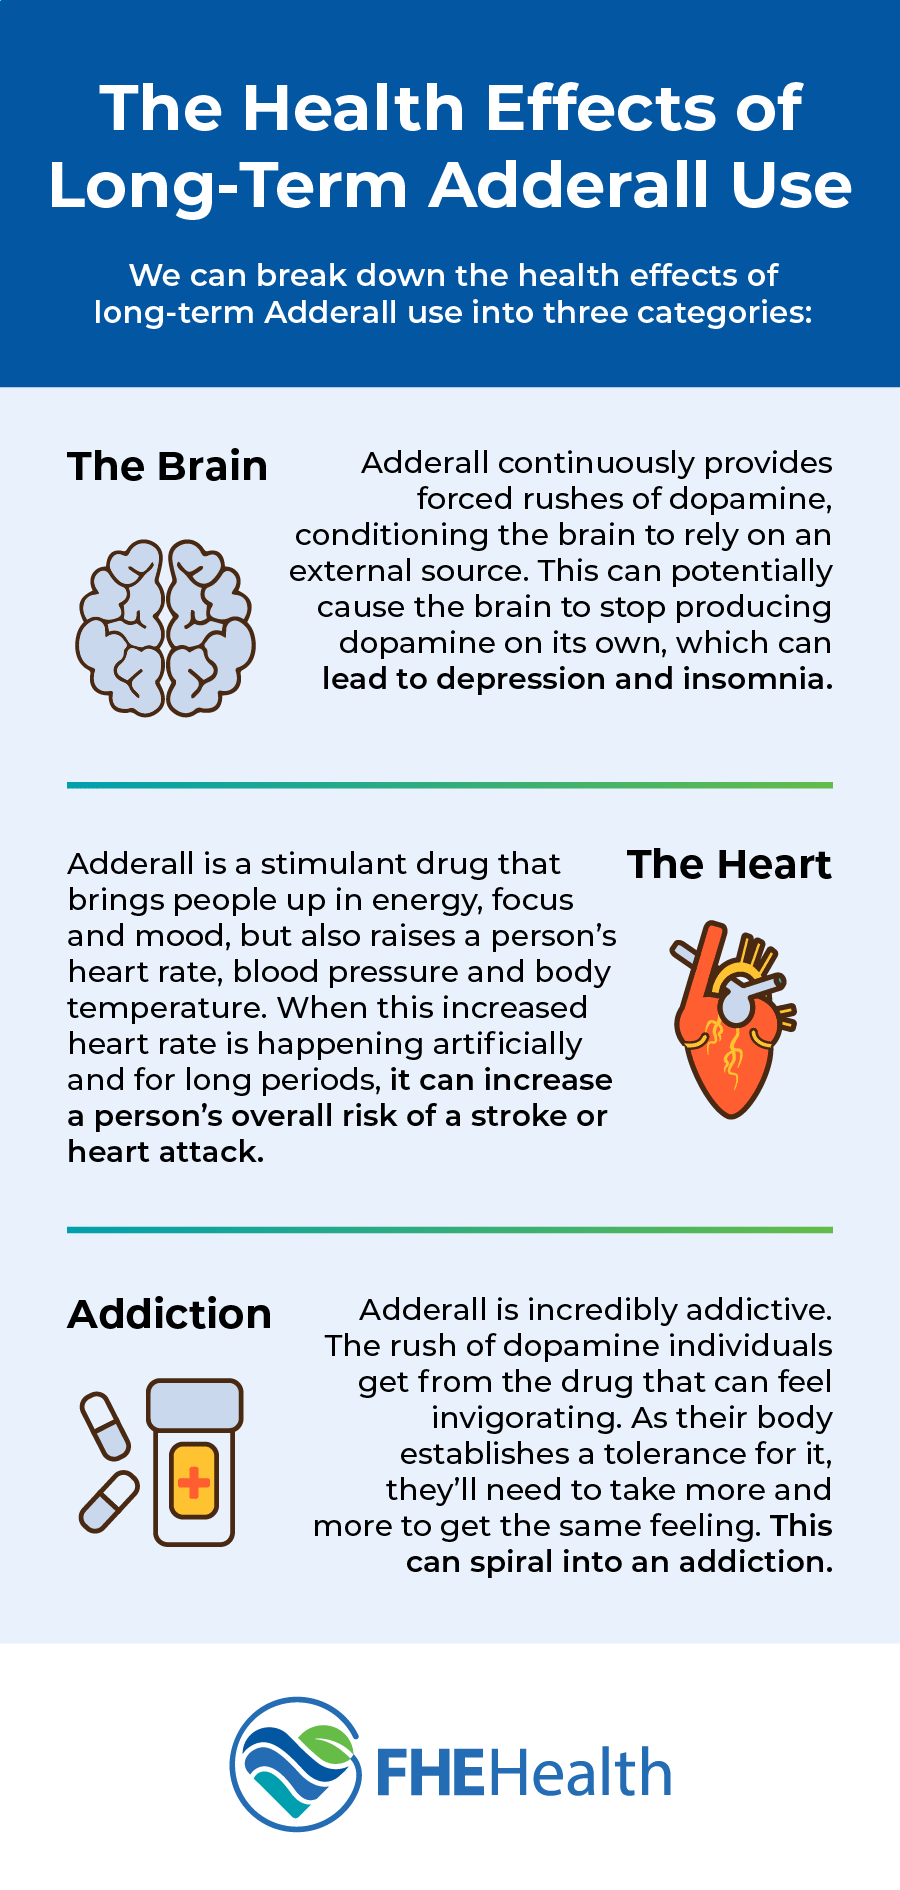 We can break down the health effects of long-term adderall use into 3 categories